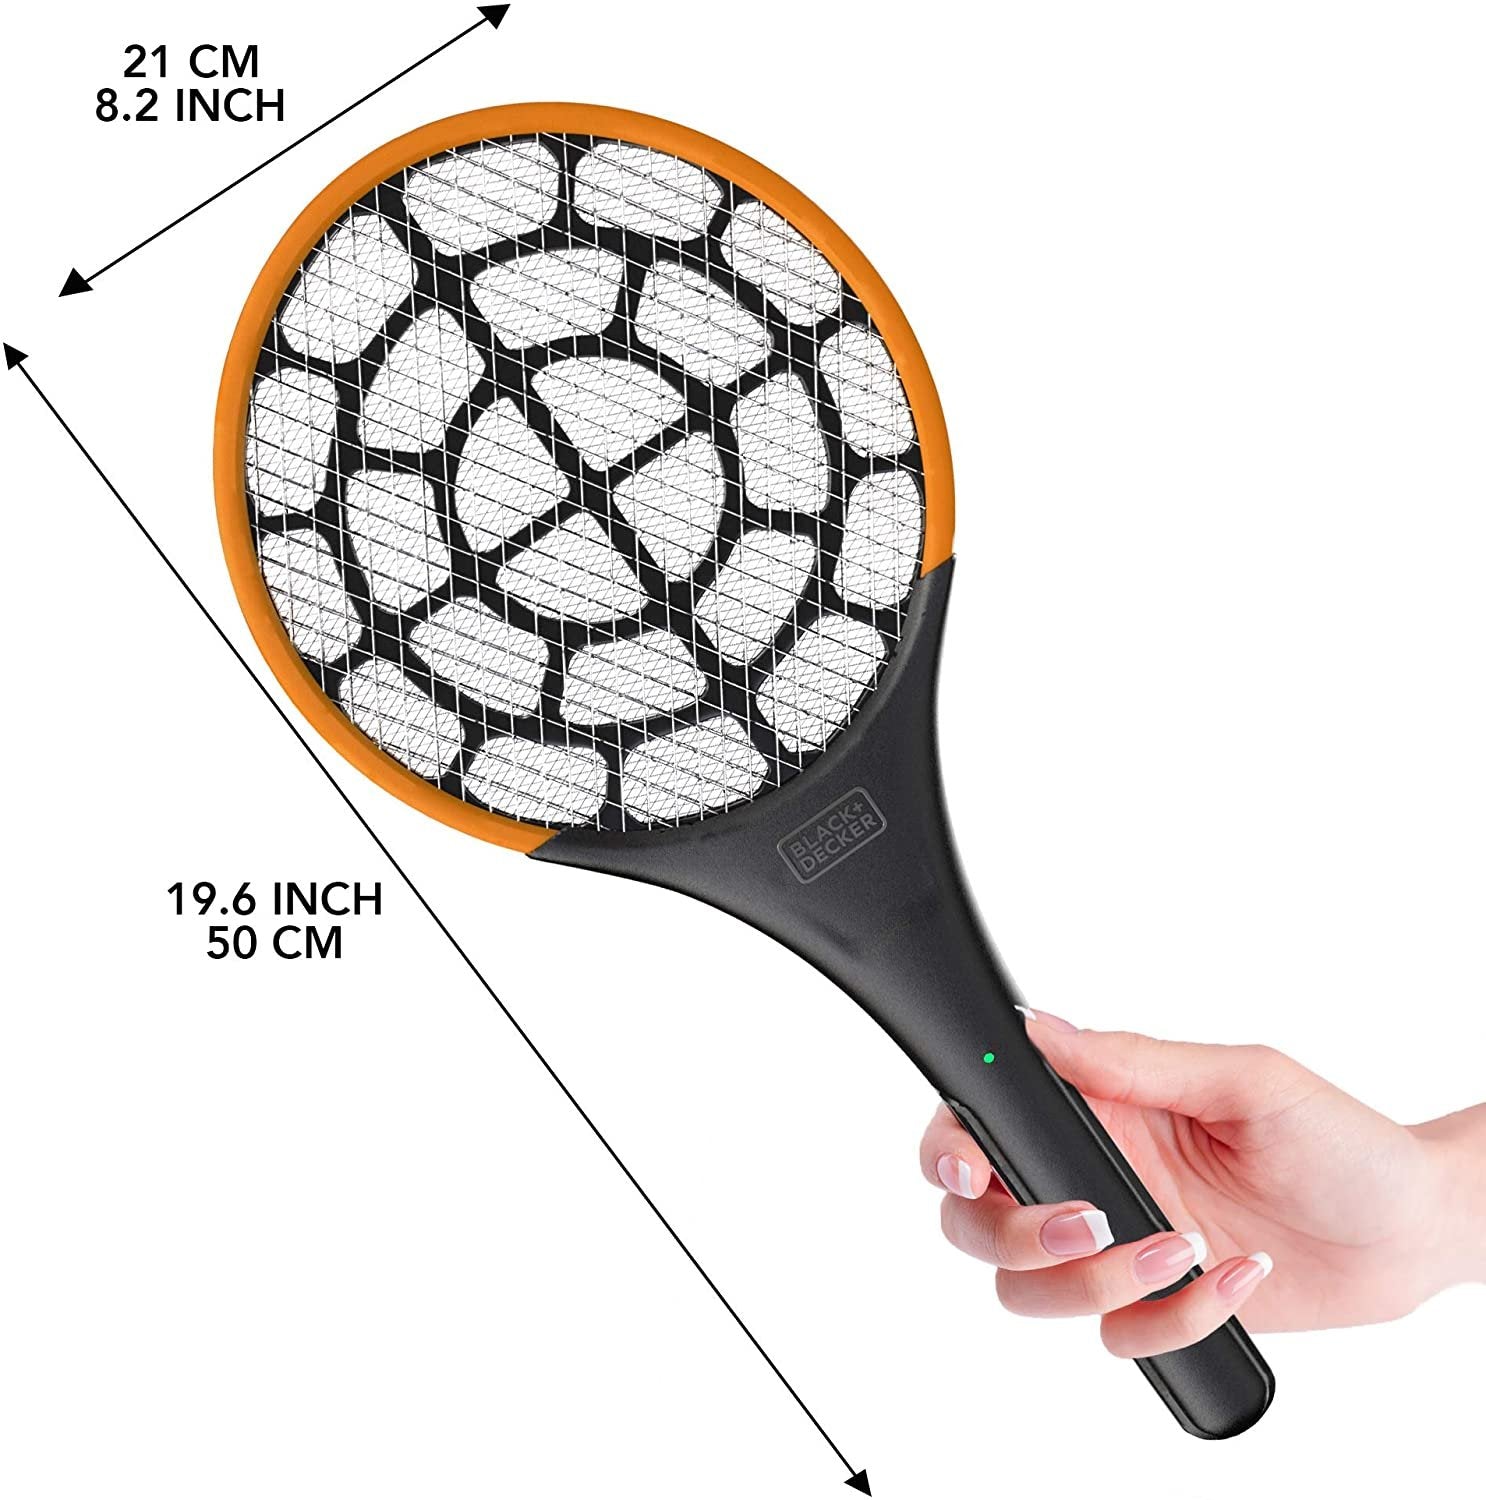 Black+Decker Electric Fly Swatter Zapper Racket- PRO 2.0 Size- Handheld Indoor/Outdoor- Non-Toxic, Safe for Humans & Pets